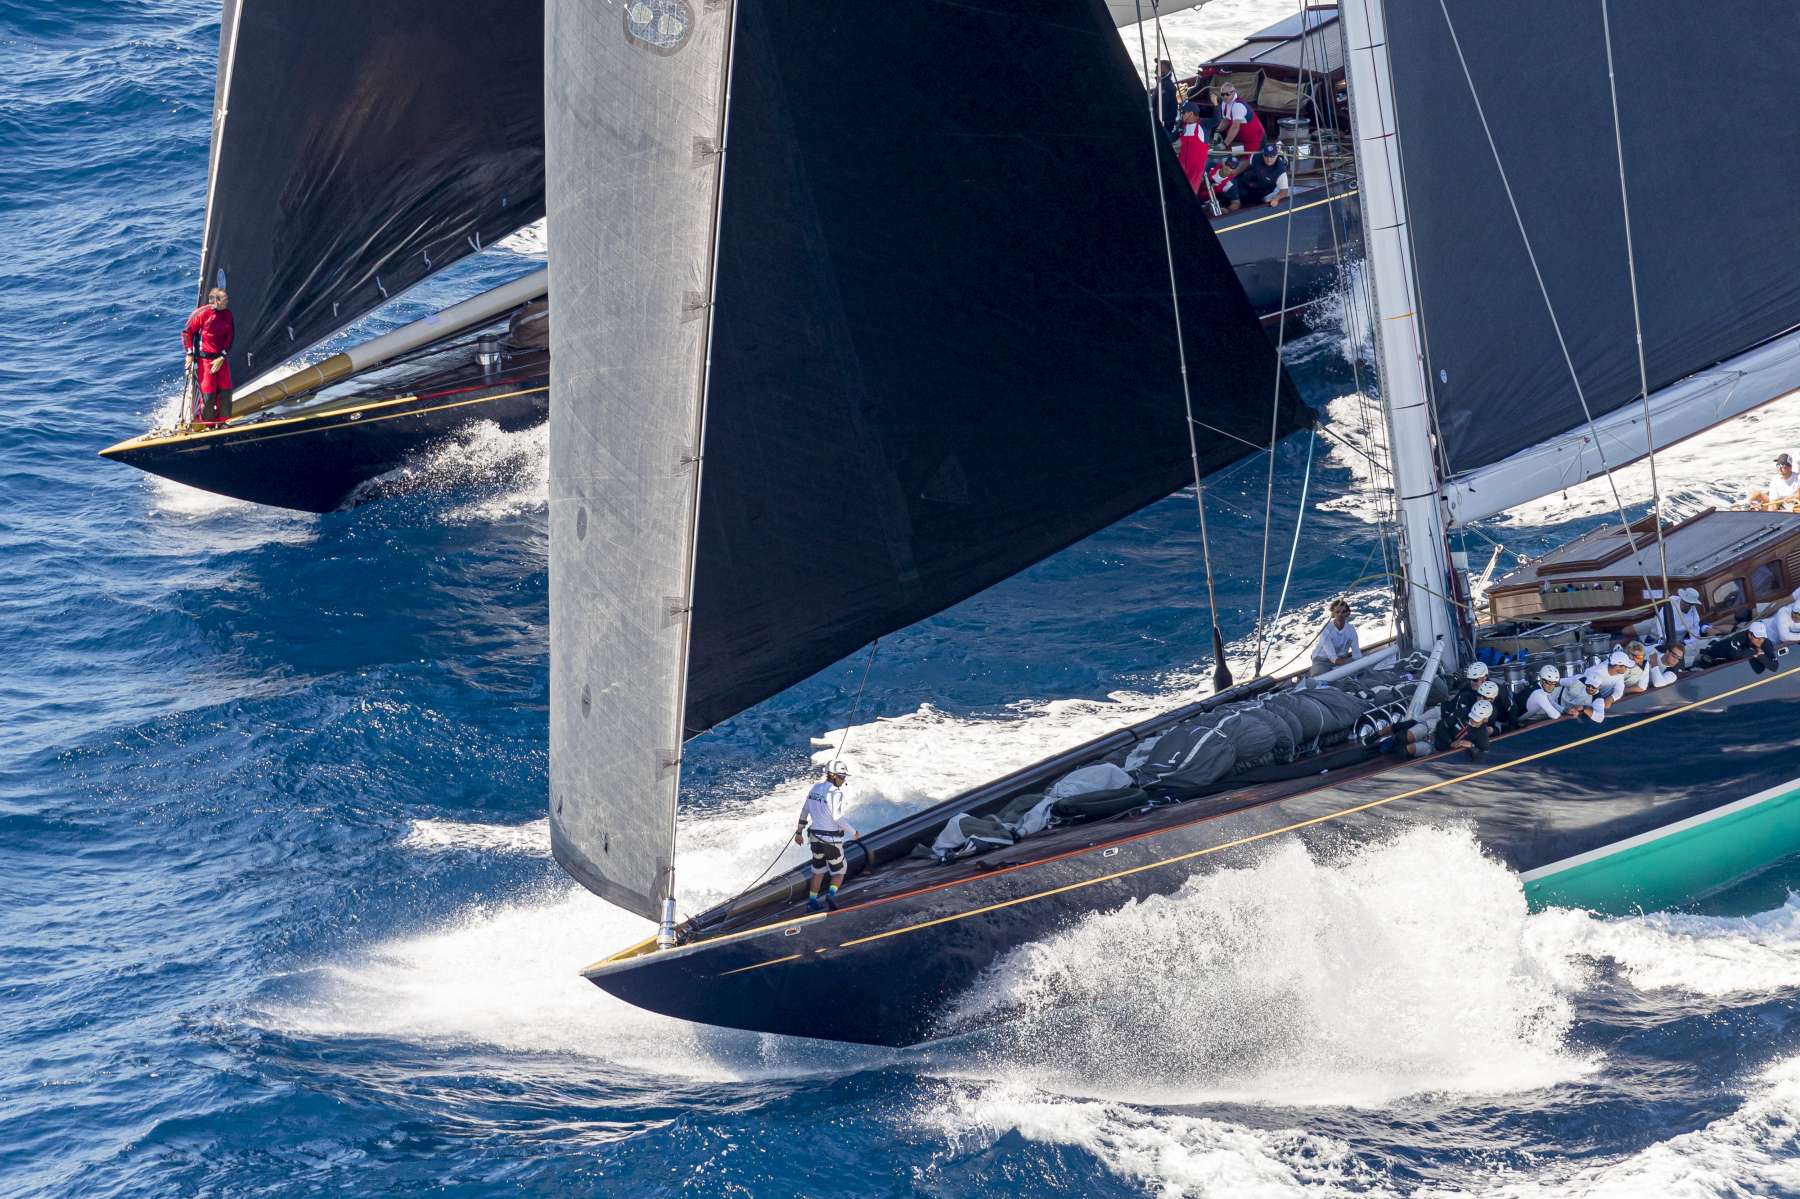  Maxi Yacht Cup  Porto Cervo ITA  Day 4, good racing in a 16kn breeze